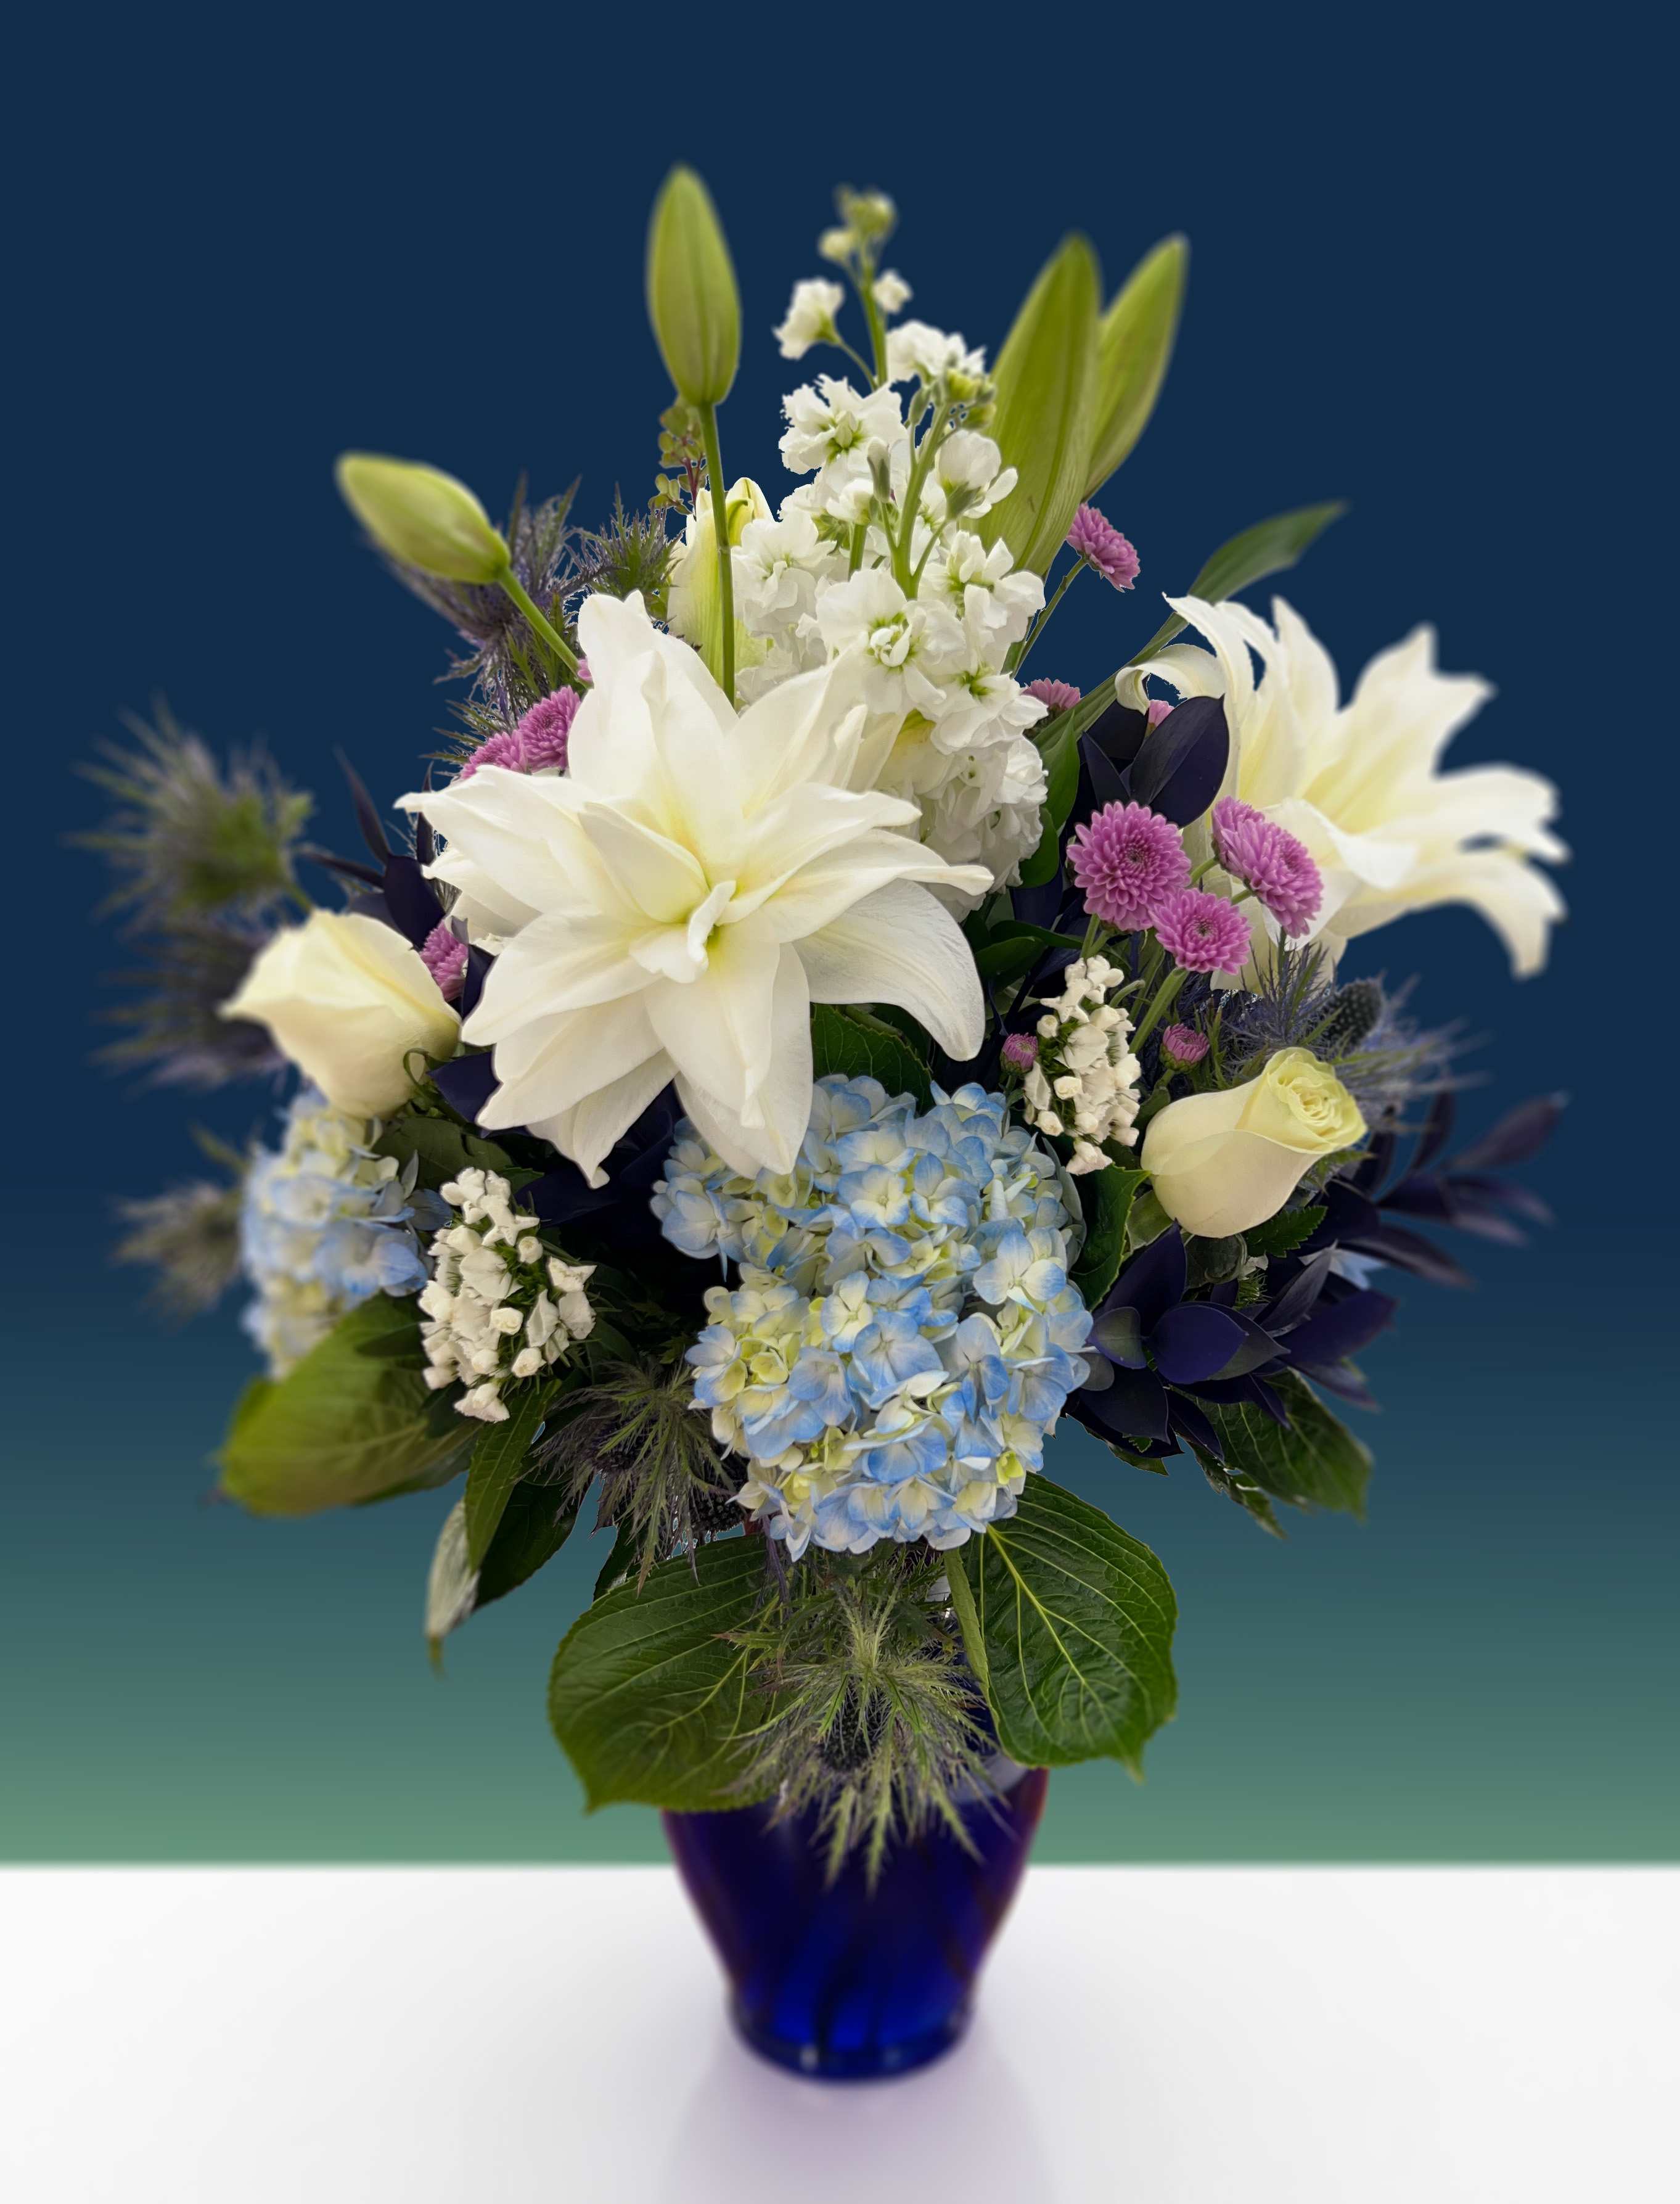 Lapis - Commemorate this historic shade of blue.  This arrangement is composed of blue thistle, blue hydrangeas, white lilies, white roses, and dark blue ruscus.